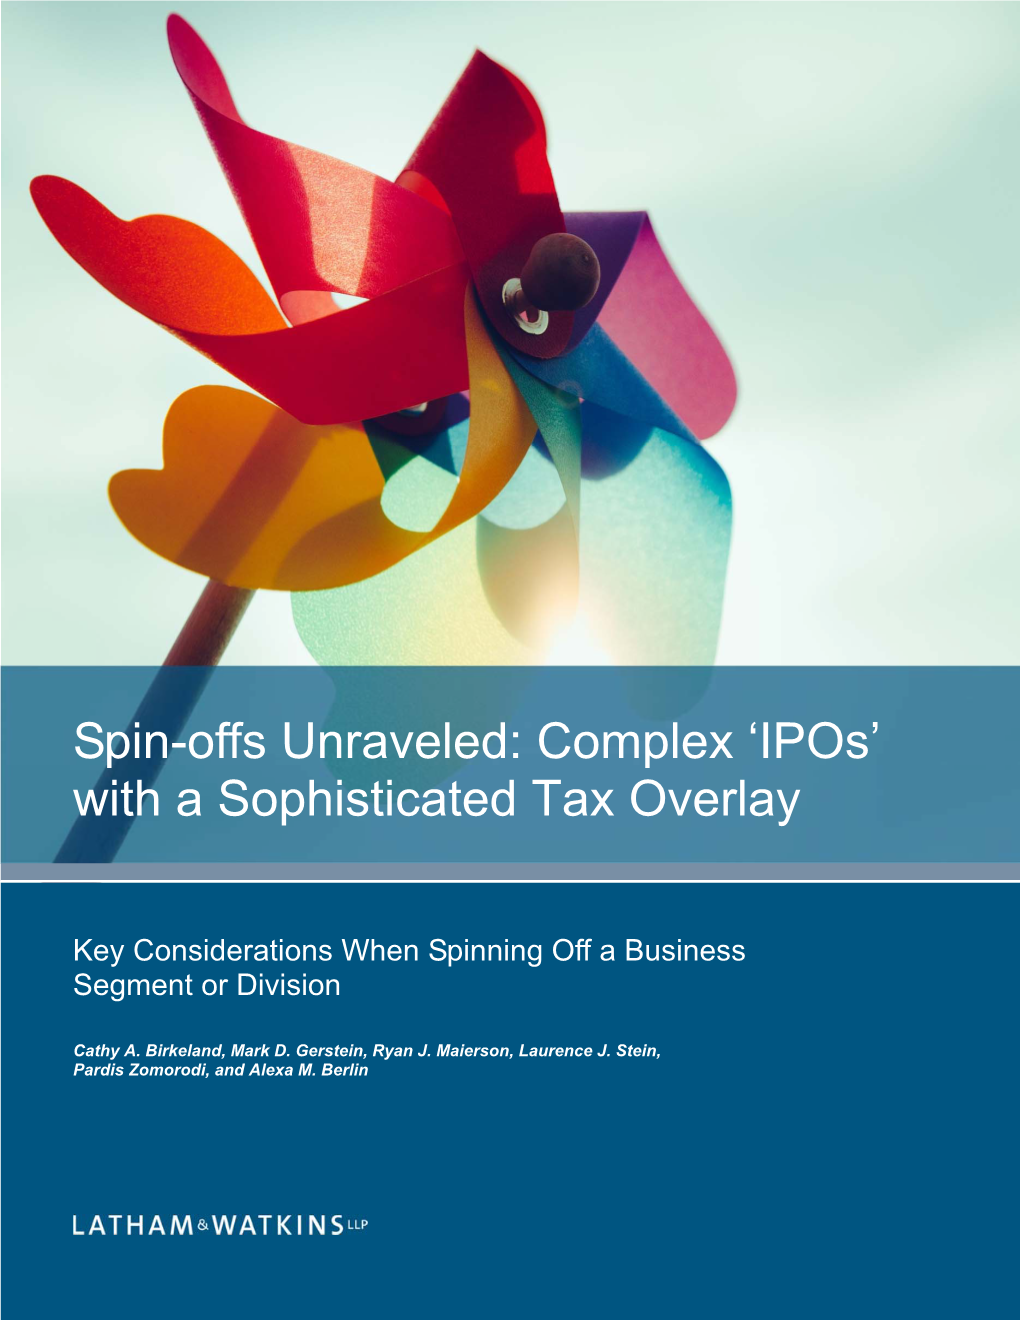 Spin-Offs Unraveled: Complex 'Ipos' with a Sophisticated Tax Overlay